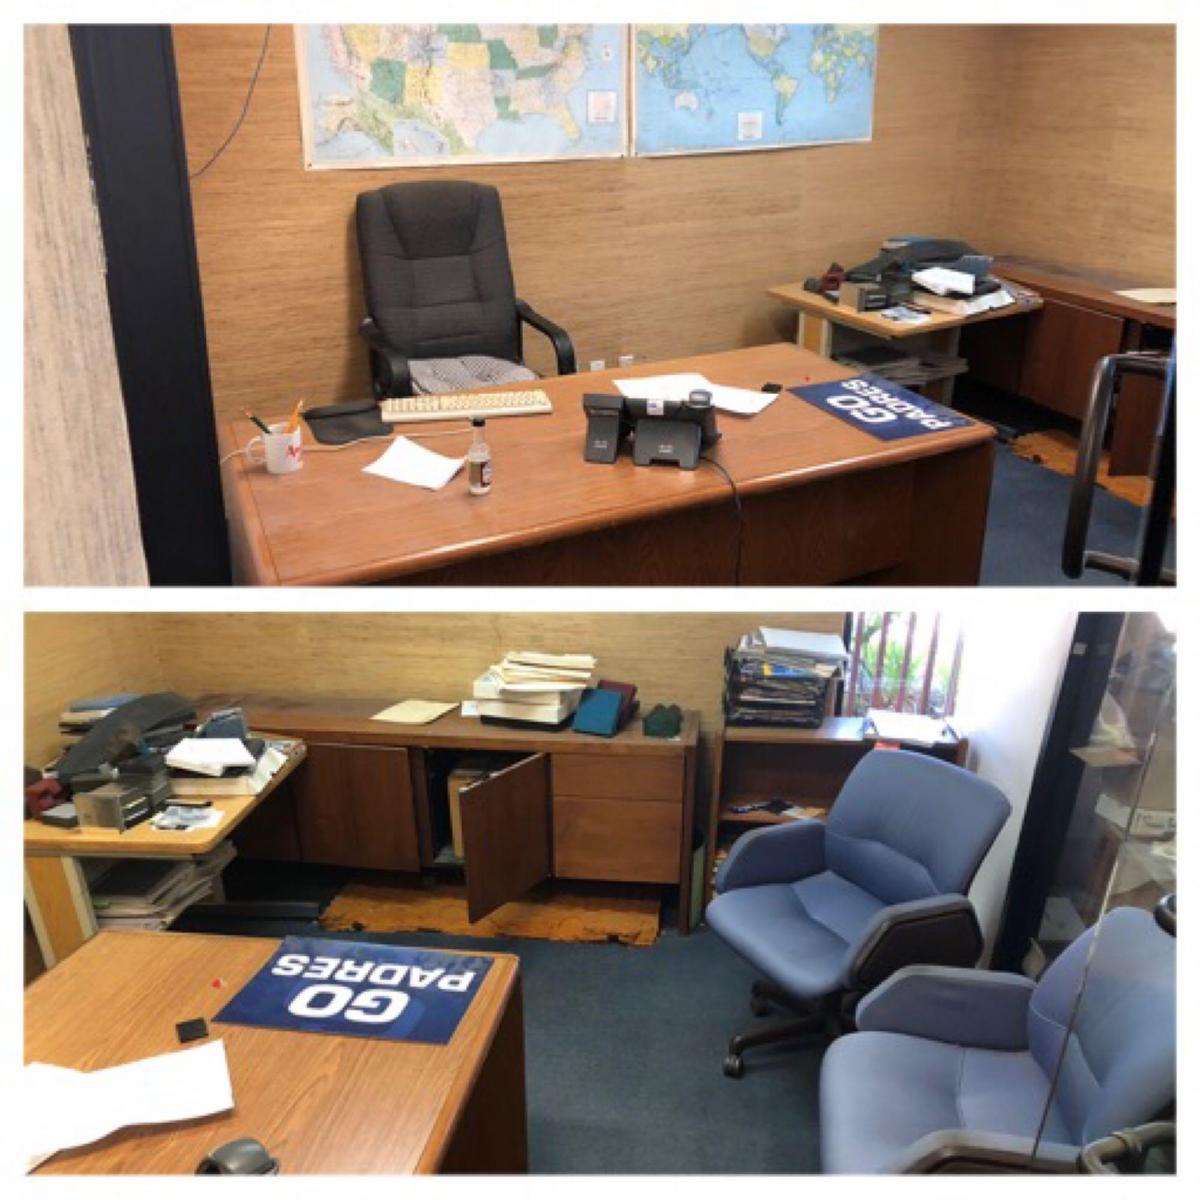 Managerial Office #1, Contents Included